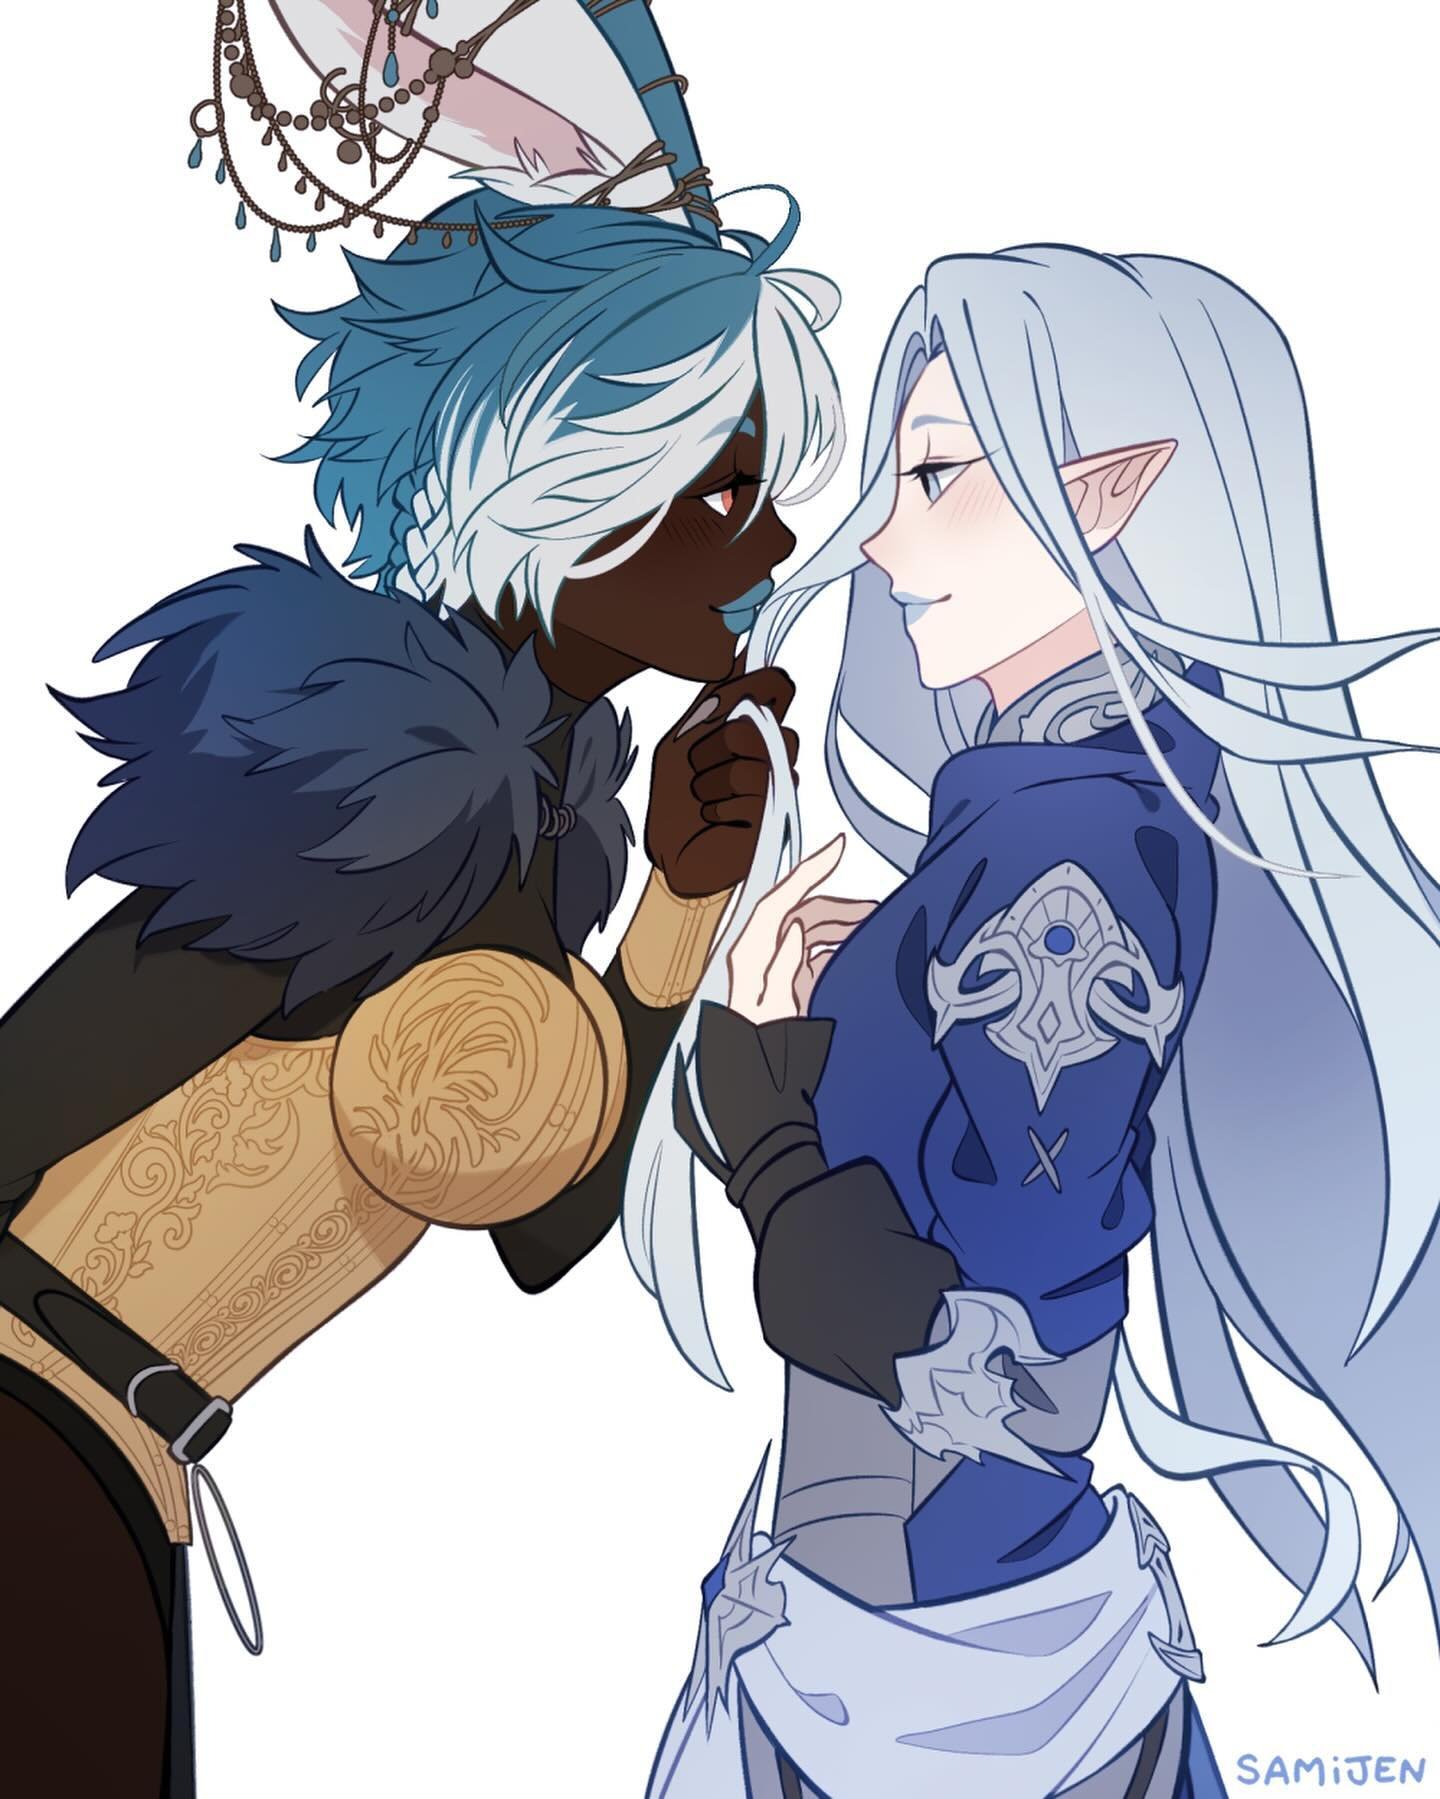 Commission for @/xivparadoxiv 💙

Art made by me using #clipstudiopaint 

#ffxiv #viera #ysayle